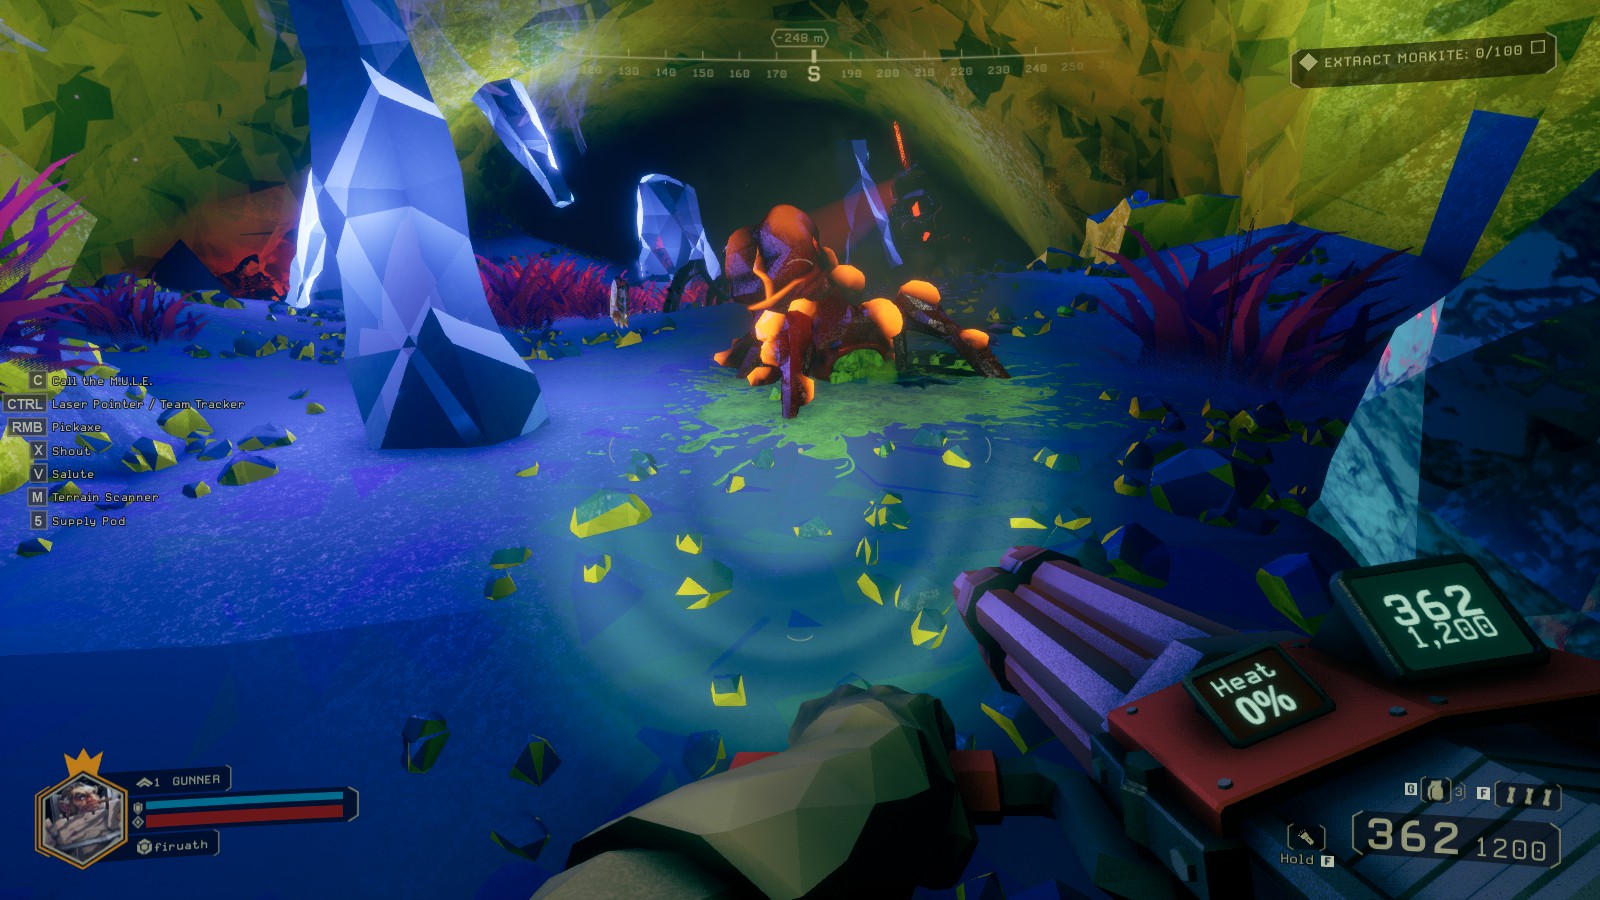 A player holds a minigun in a blue and green cave as he searches for gems in Deep Rock Galactic